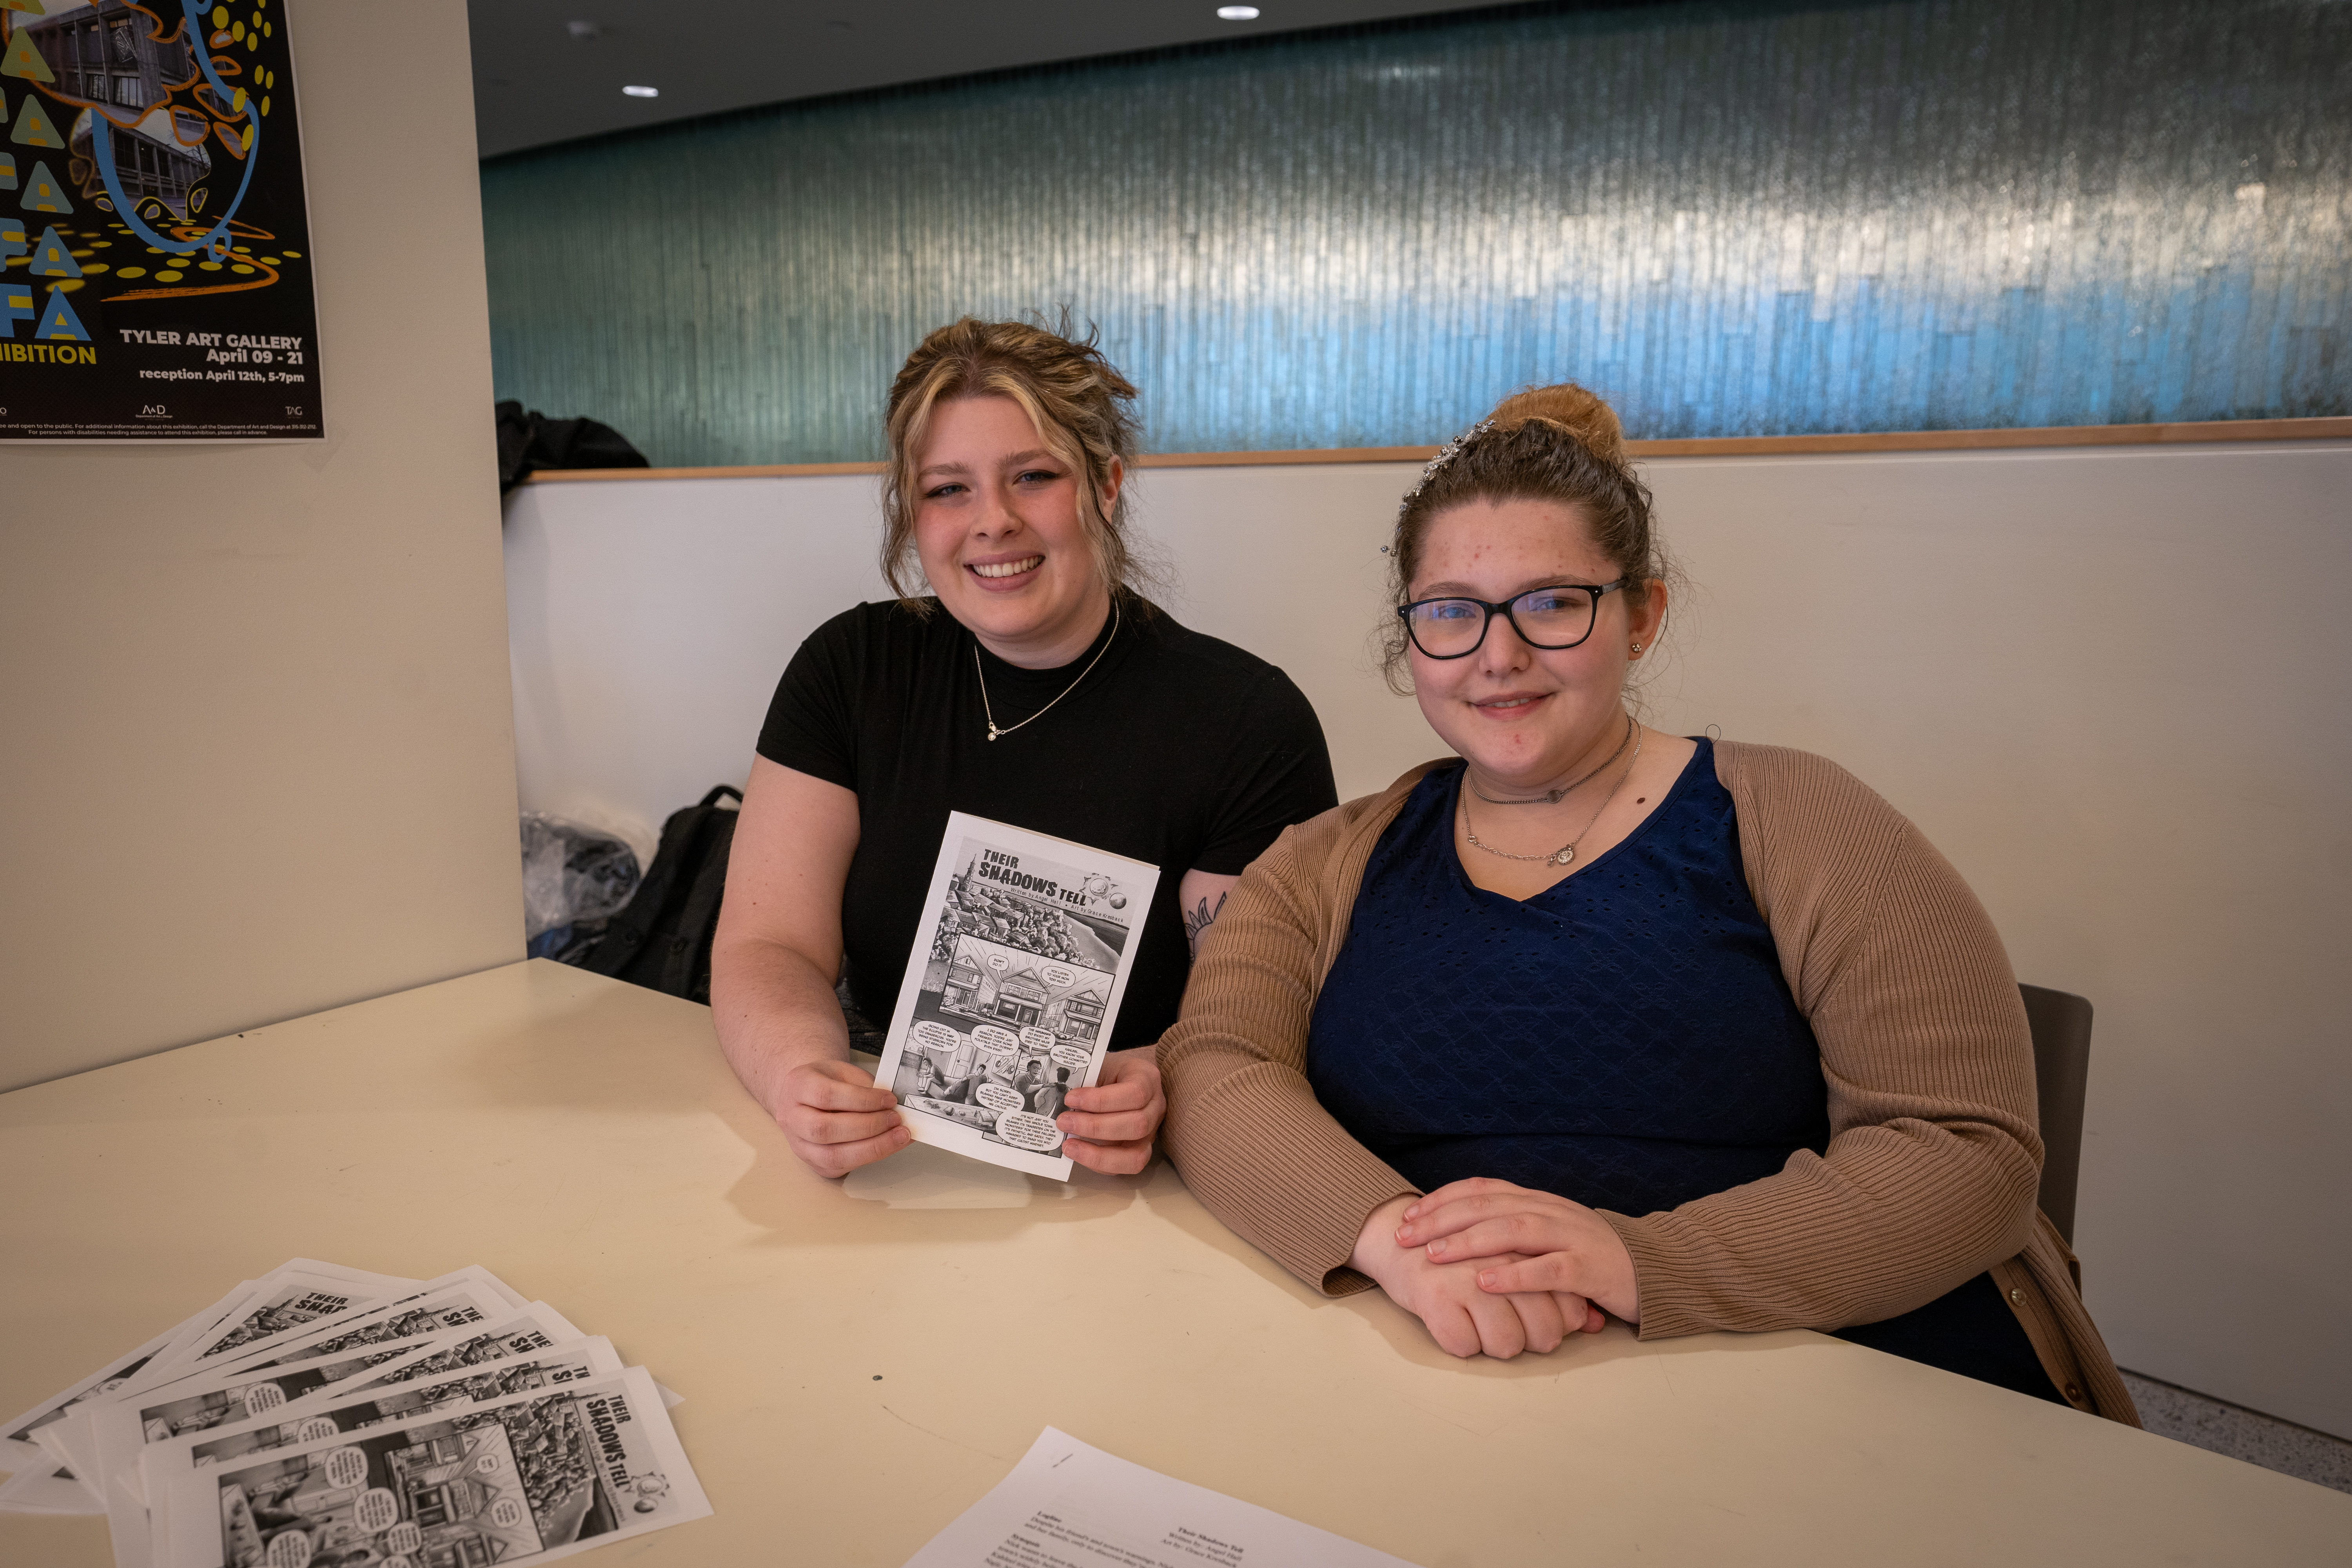 Illustrator Grace Kresback (left) and author Angel Hall (right) collaborated on their graphic novel, "Their Shadows Tell,” which they shared as part of Quest activities in the Tyler Hall lobby.